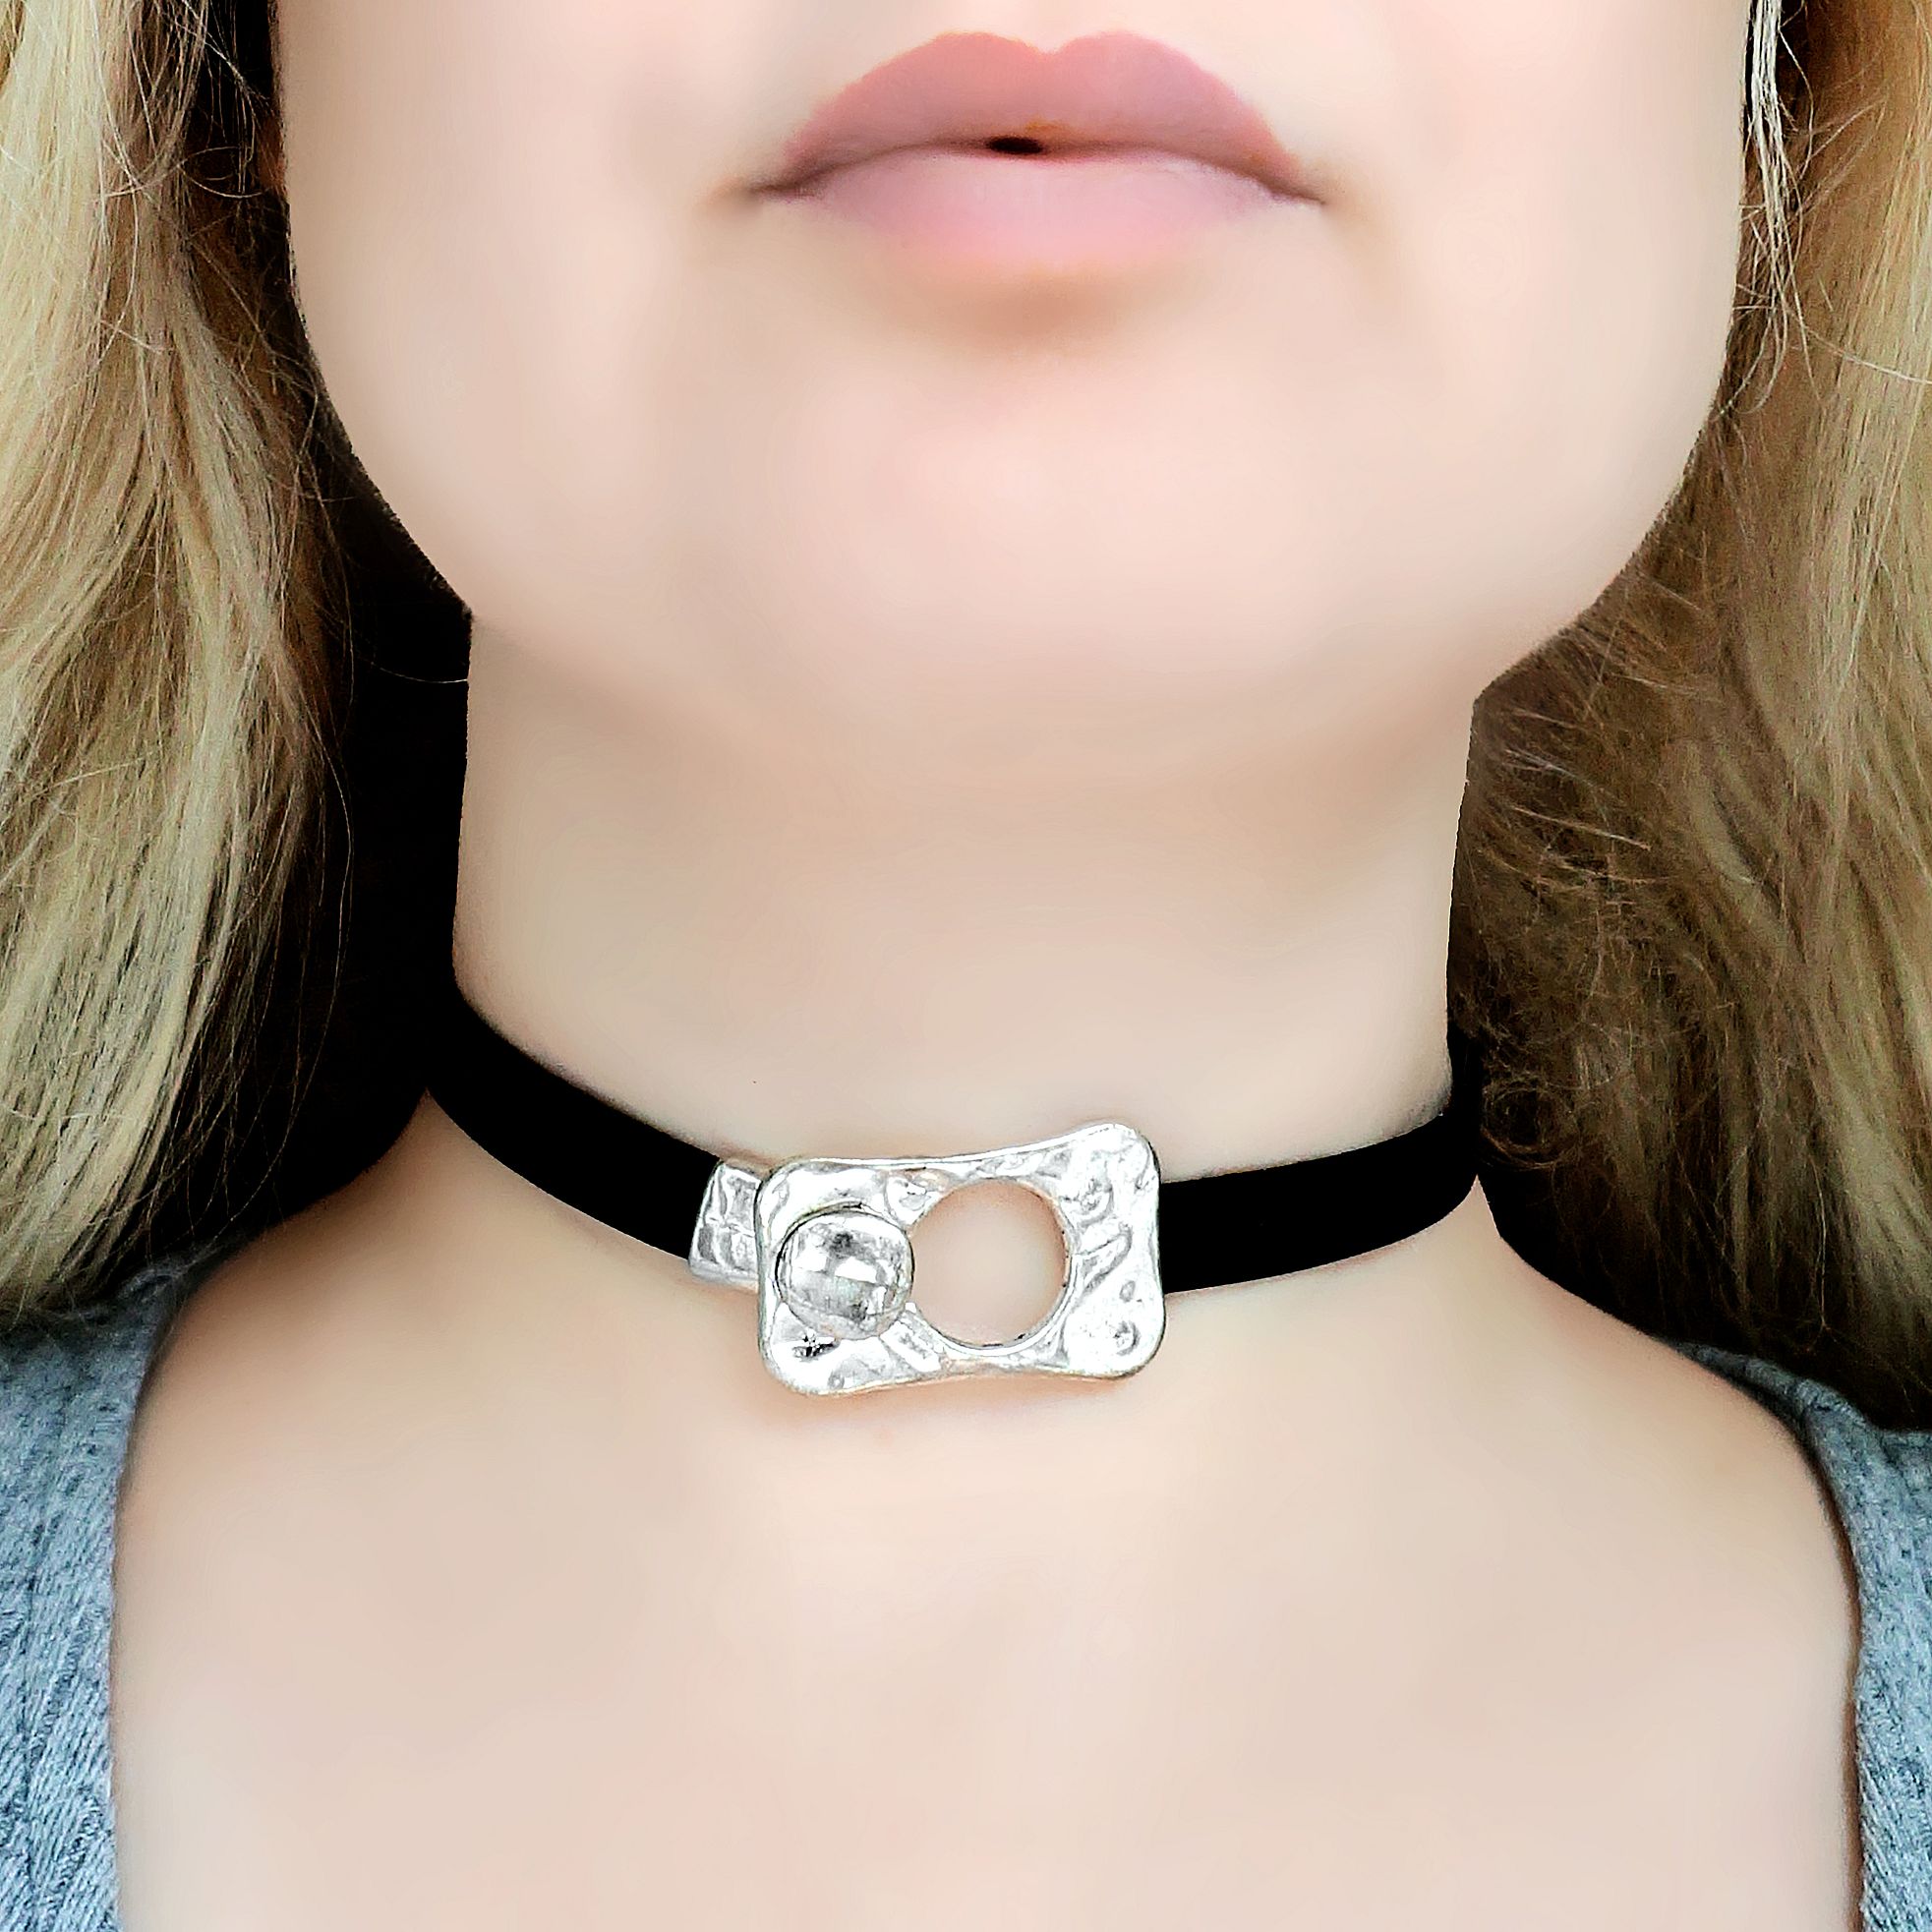 Devil's Delight Fiery Passion Discreet Locking Day Collar and Drop Chain  W/black Stainless Steel Wheat Braid Chain, Made to Order - Etsy | Drop  chain, Day collar, Necklace sizes